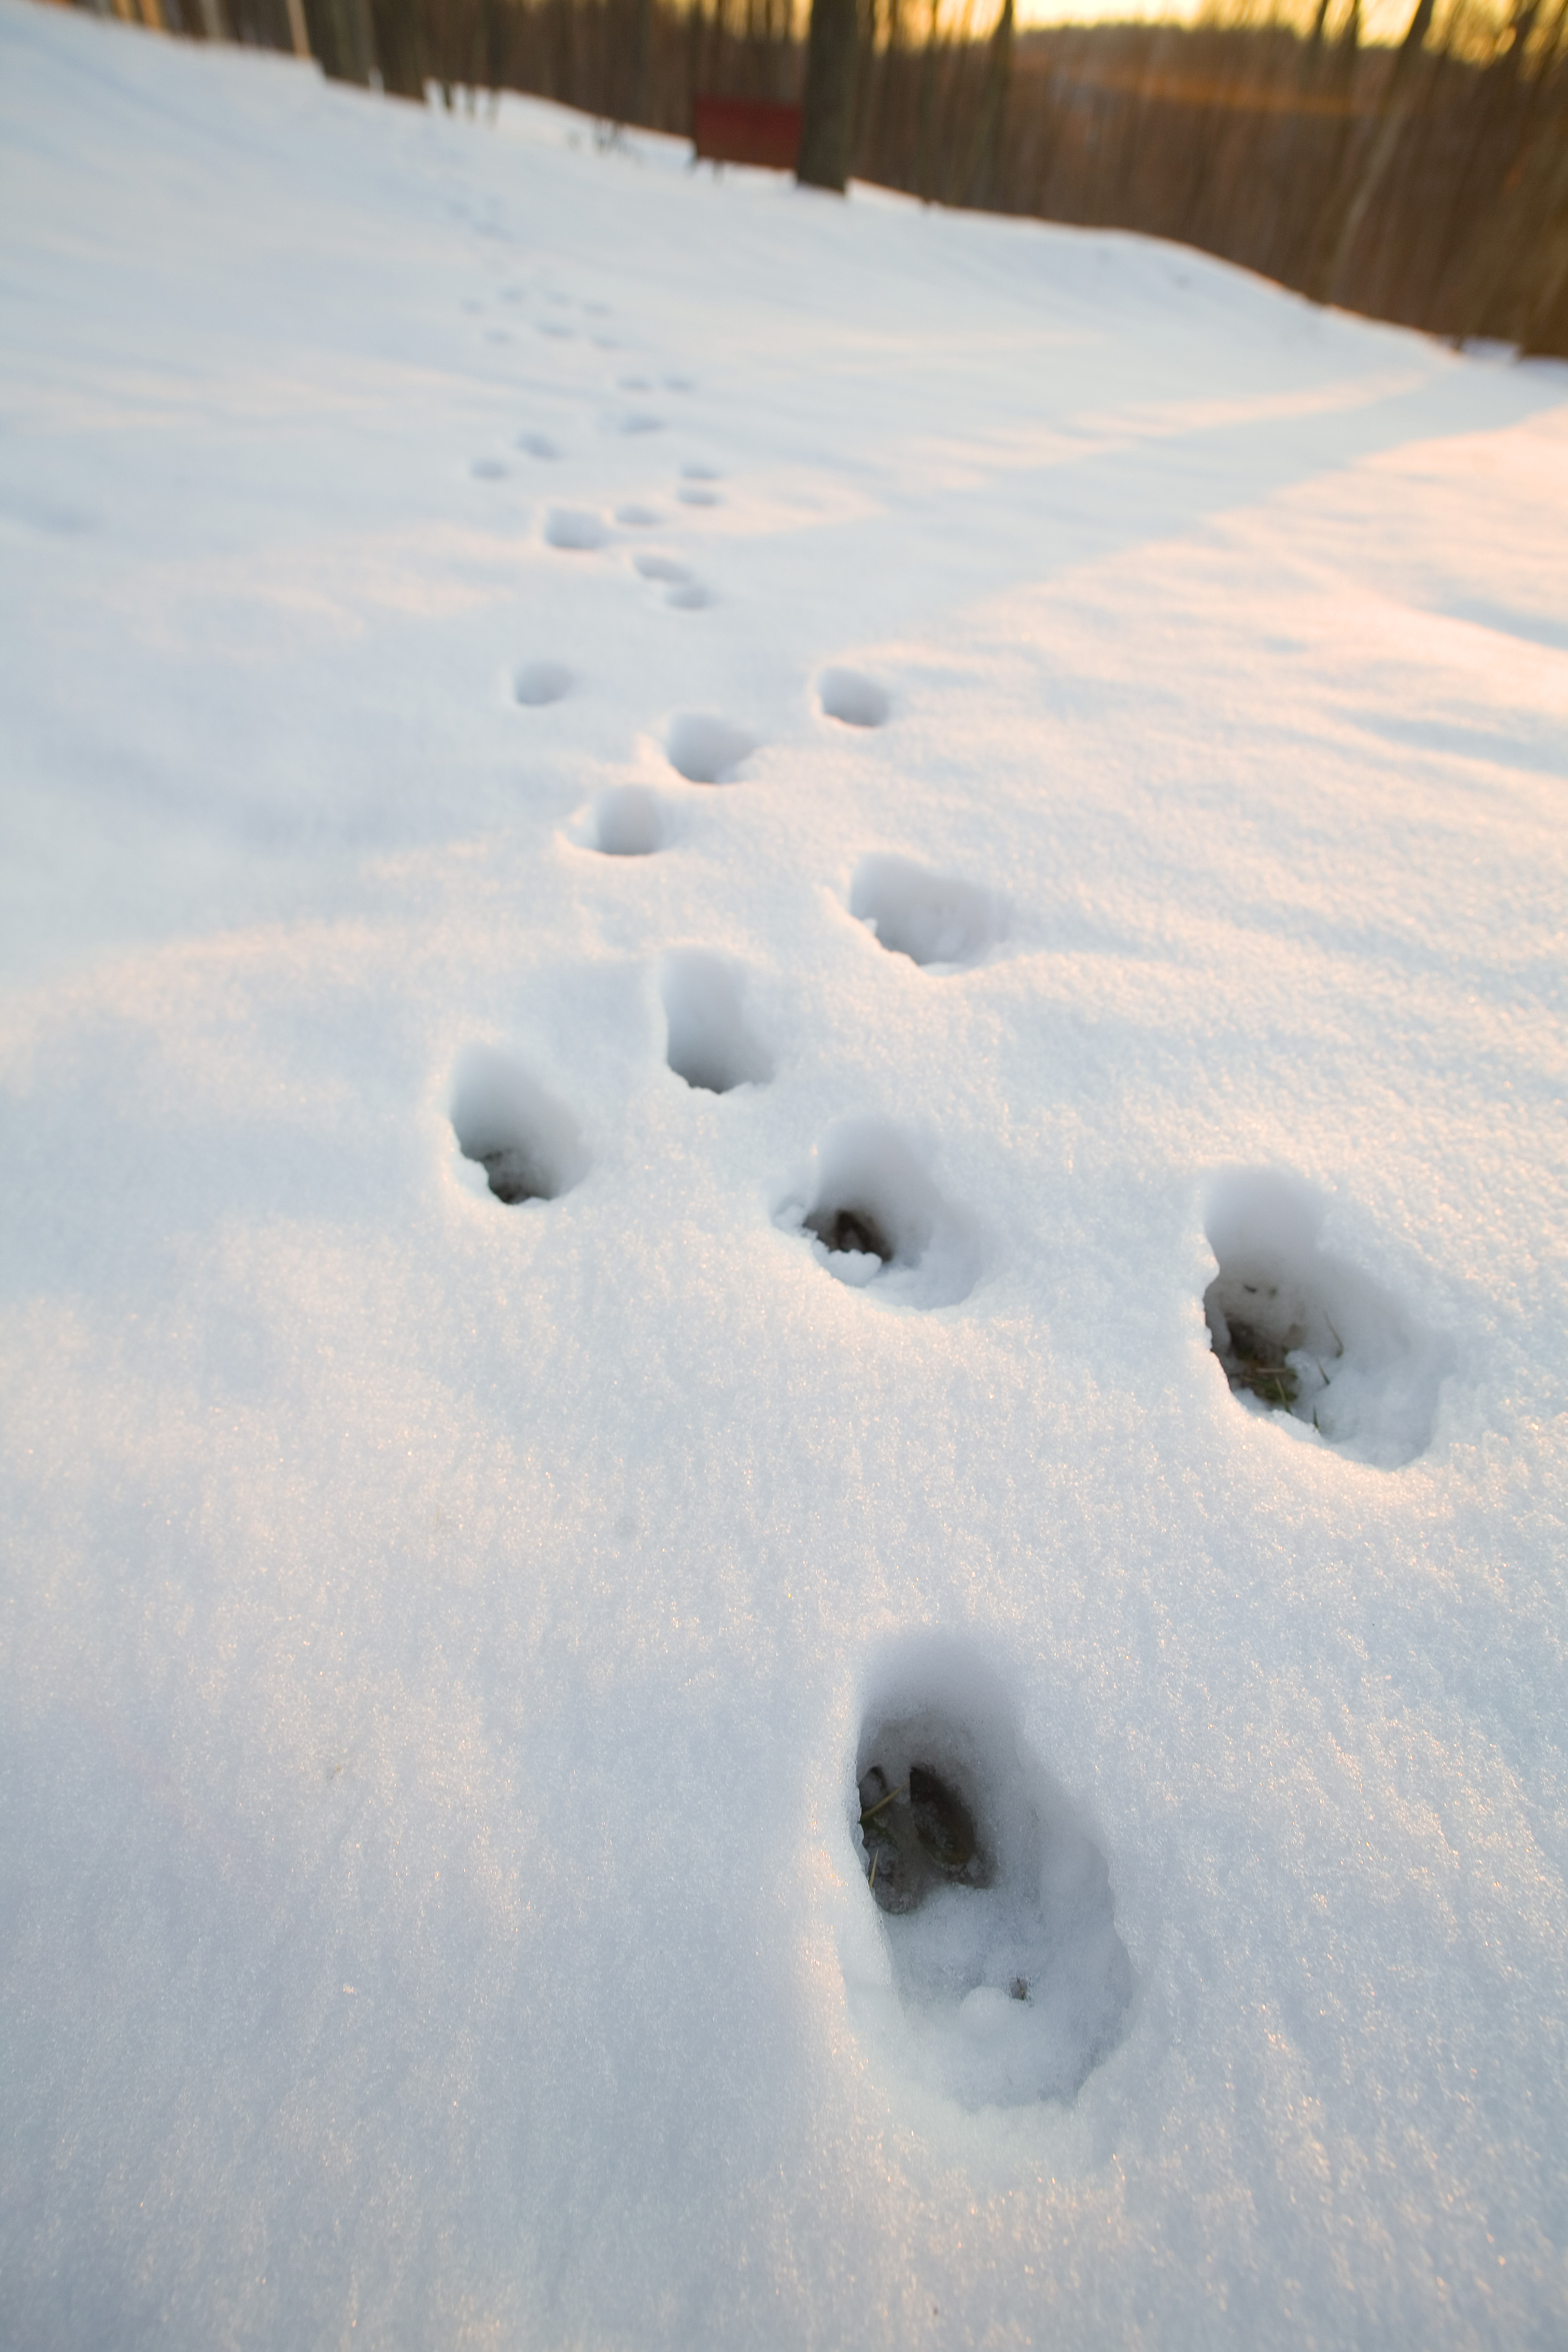 Animal tracks in the snow. 